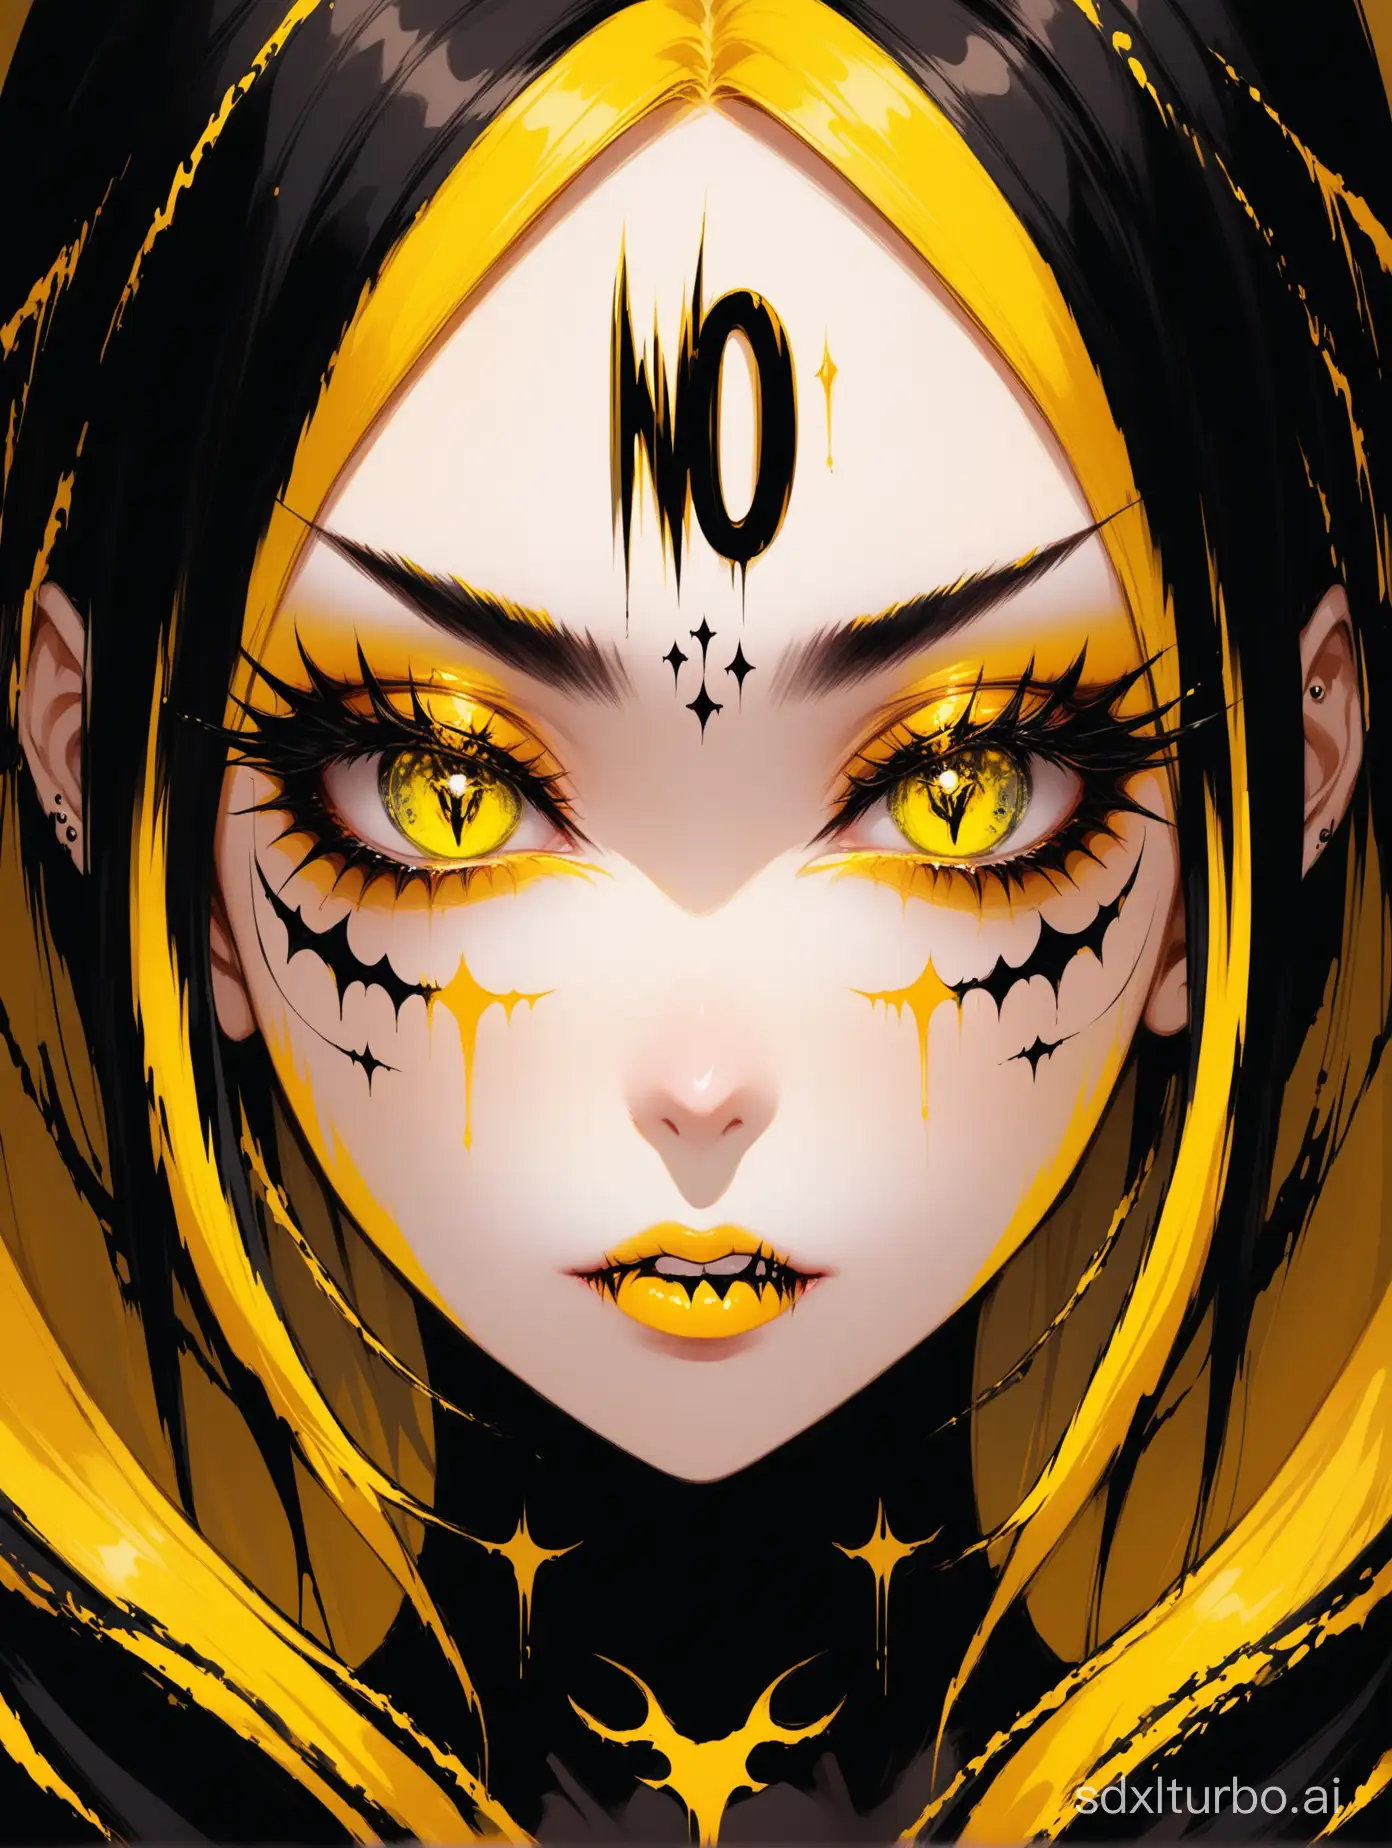 fantasy, abstraction, demonic girl, she has different contact lenses, inscription "NO" throughout face, black and yellow colors, spectacular, beautiful, aesthetics